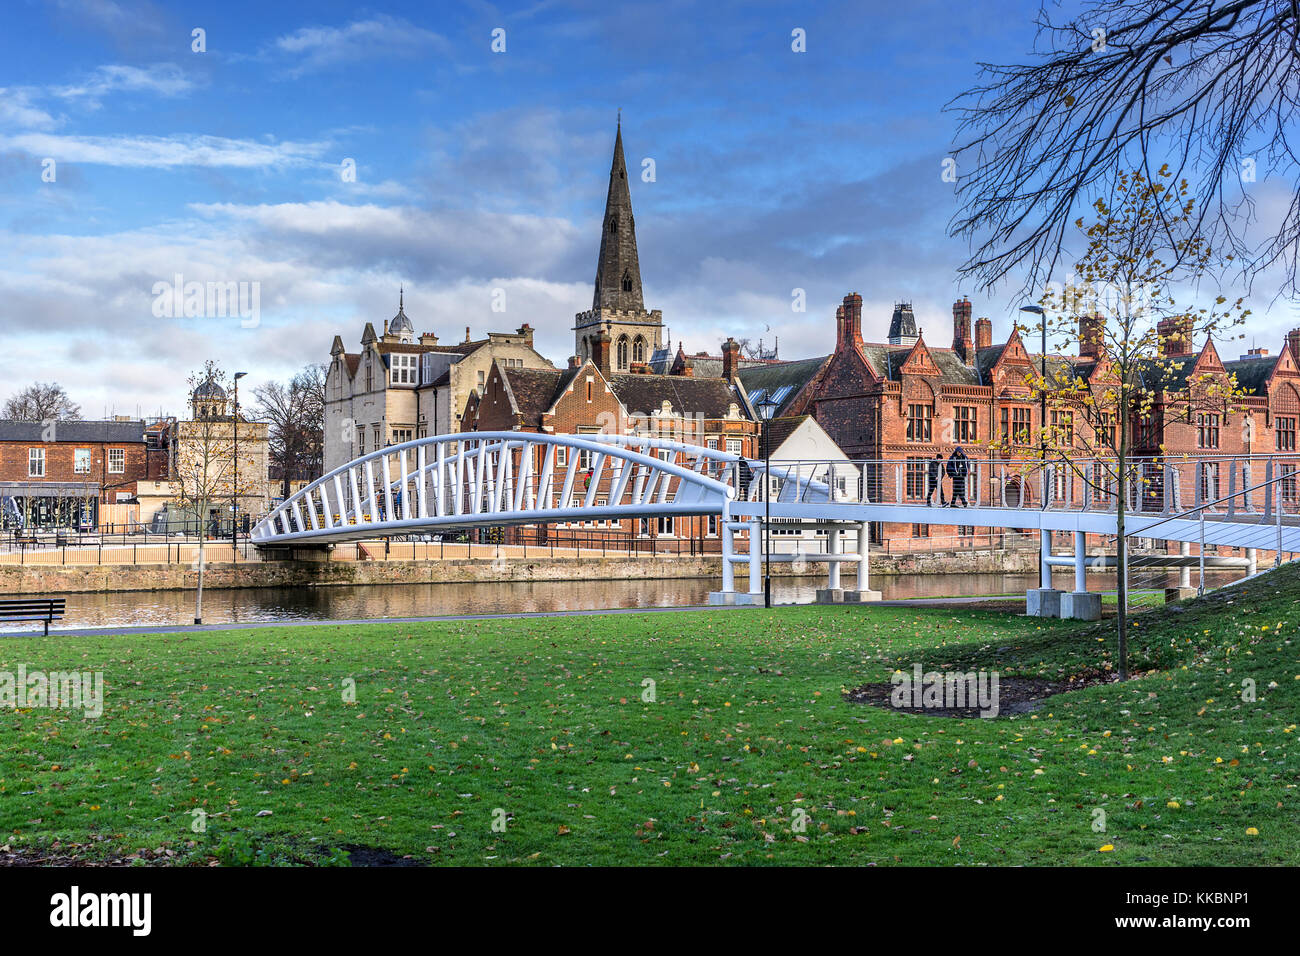 Bedford Riverside on the great ouse river Stock Photo